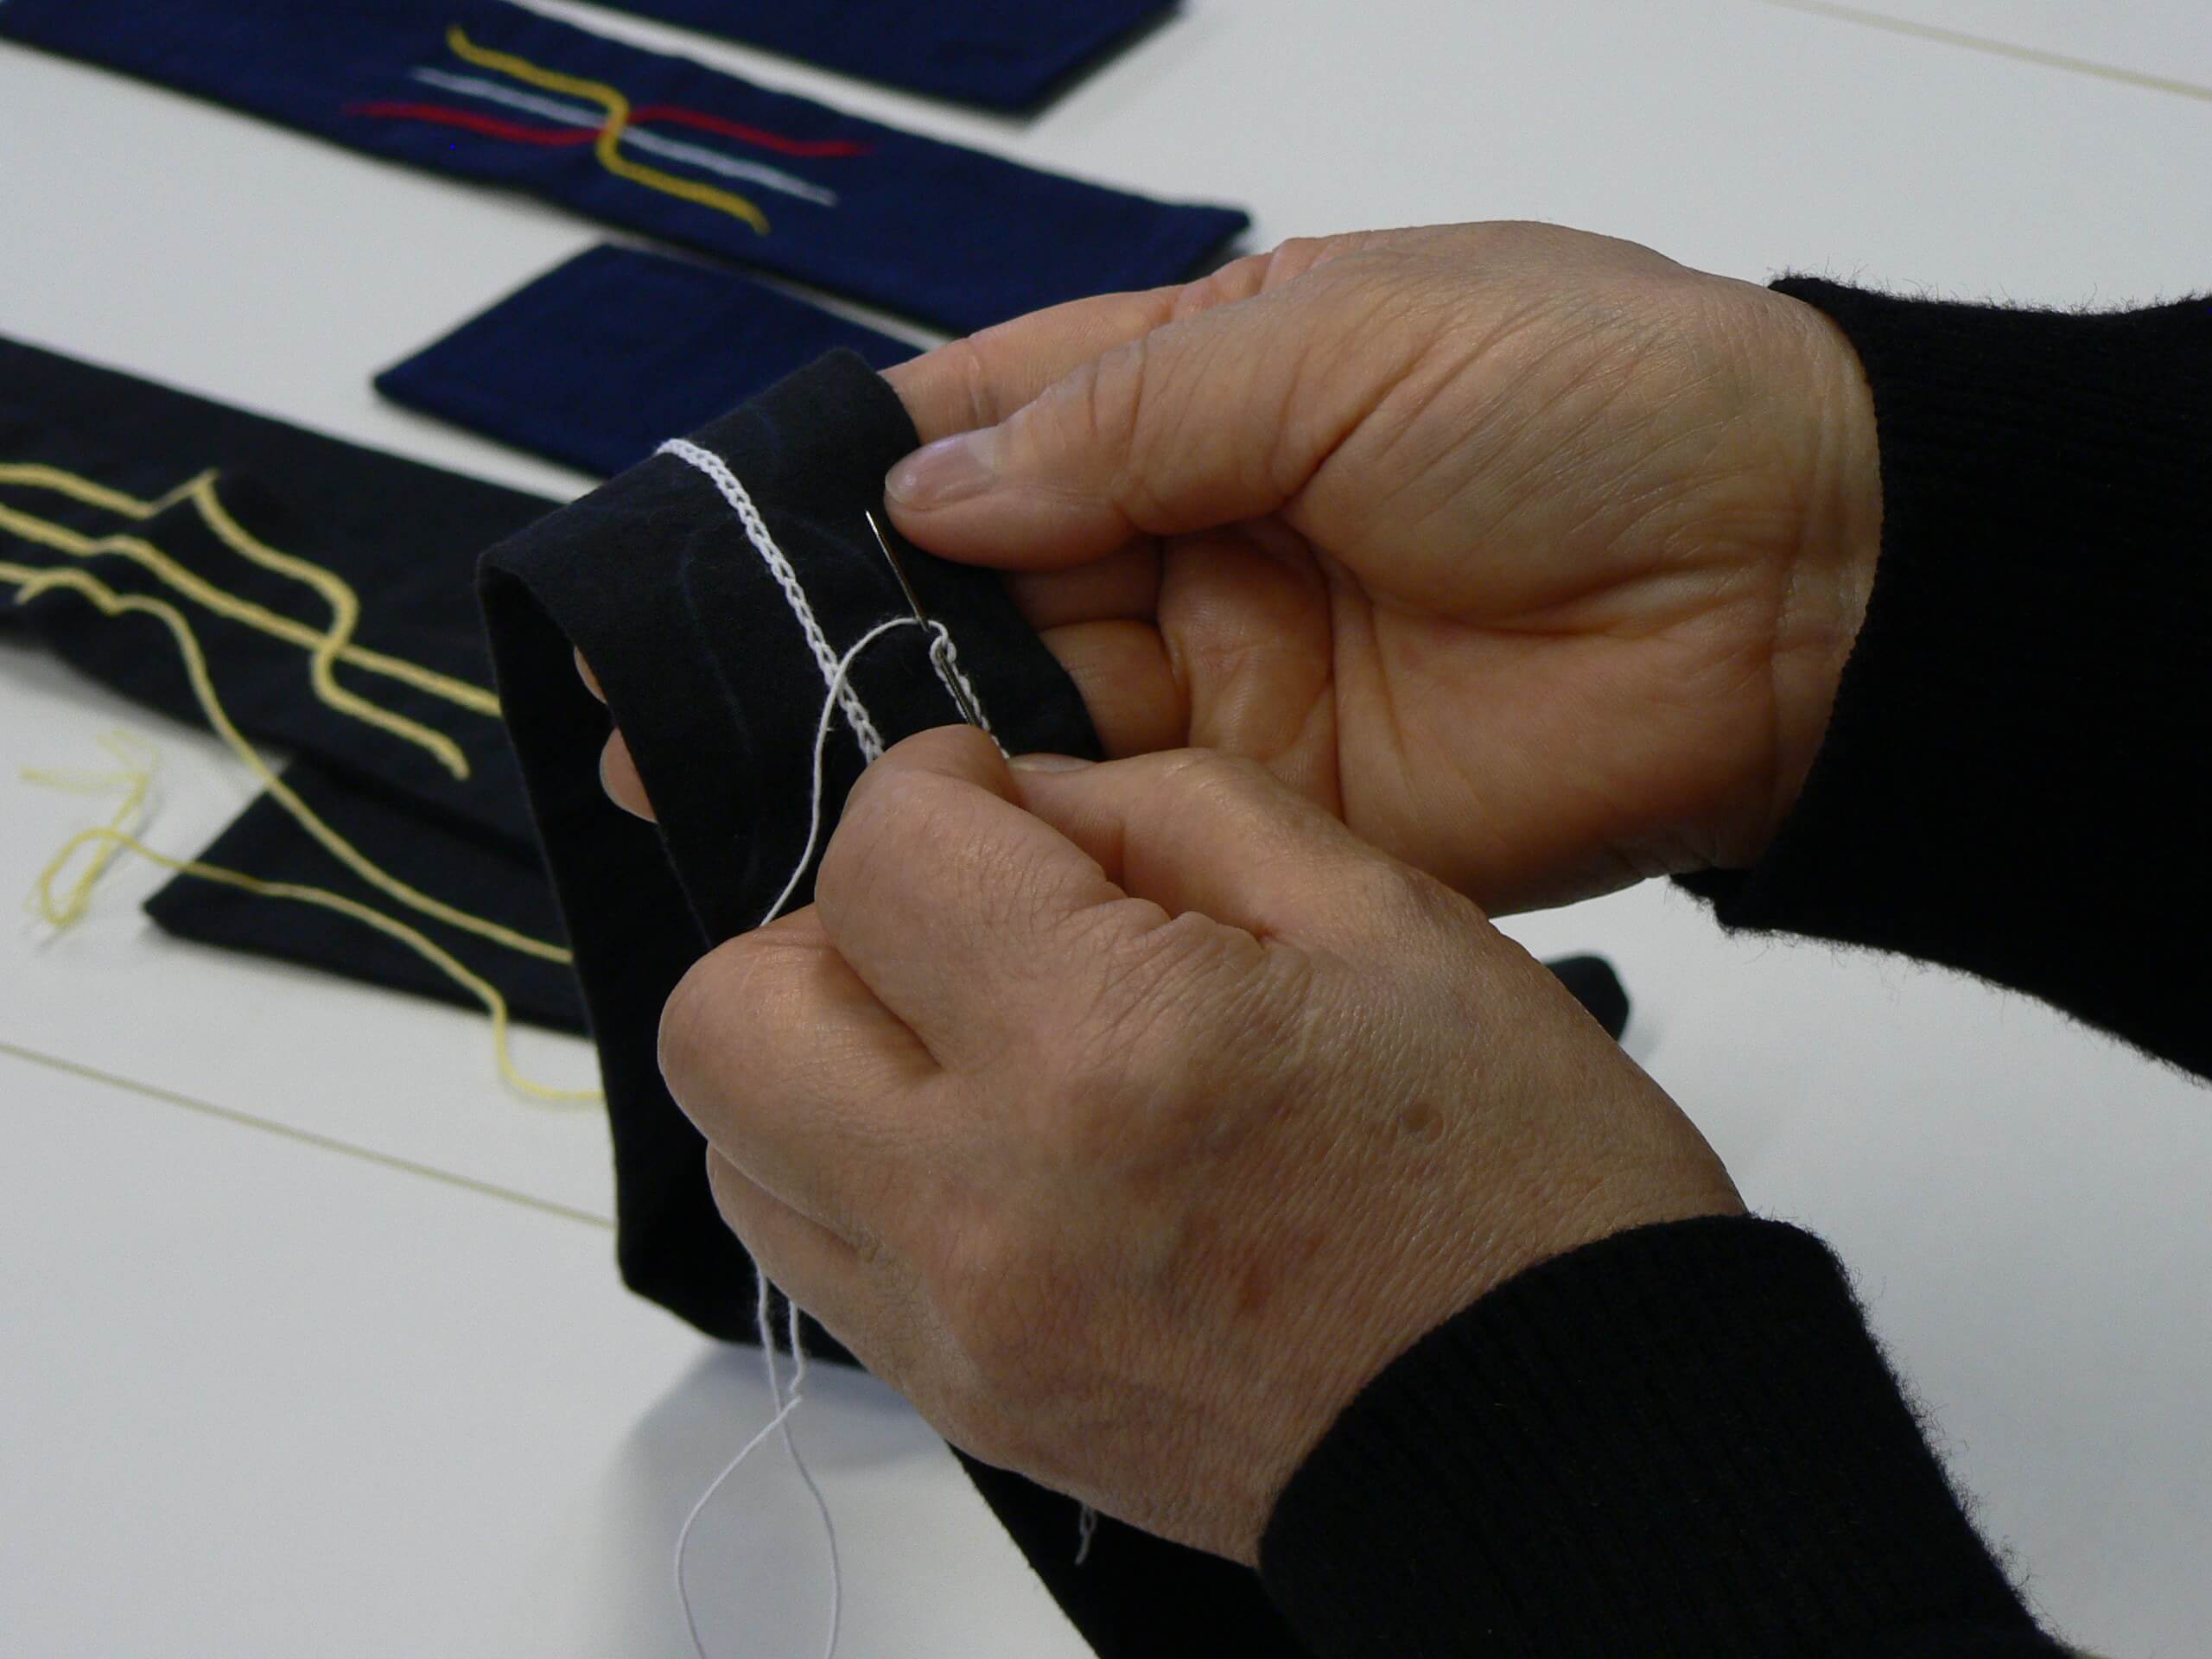 Ainu Embroidery Lessons: Come and Learn a Sacred Cultural Practice